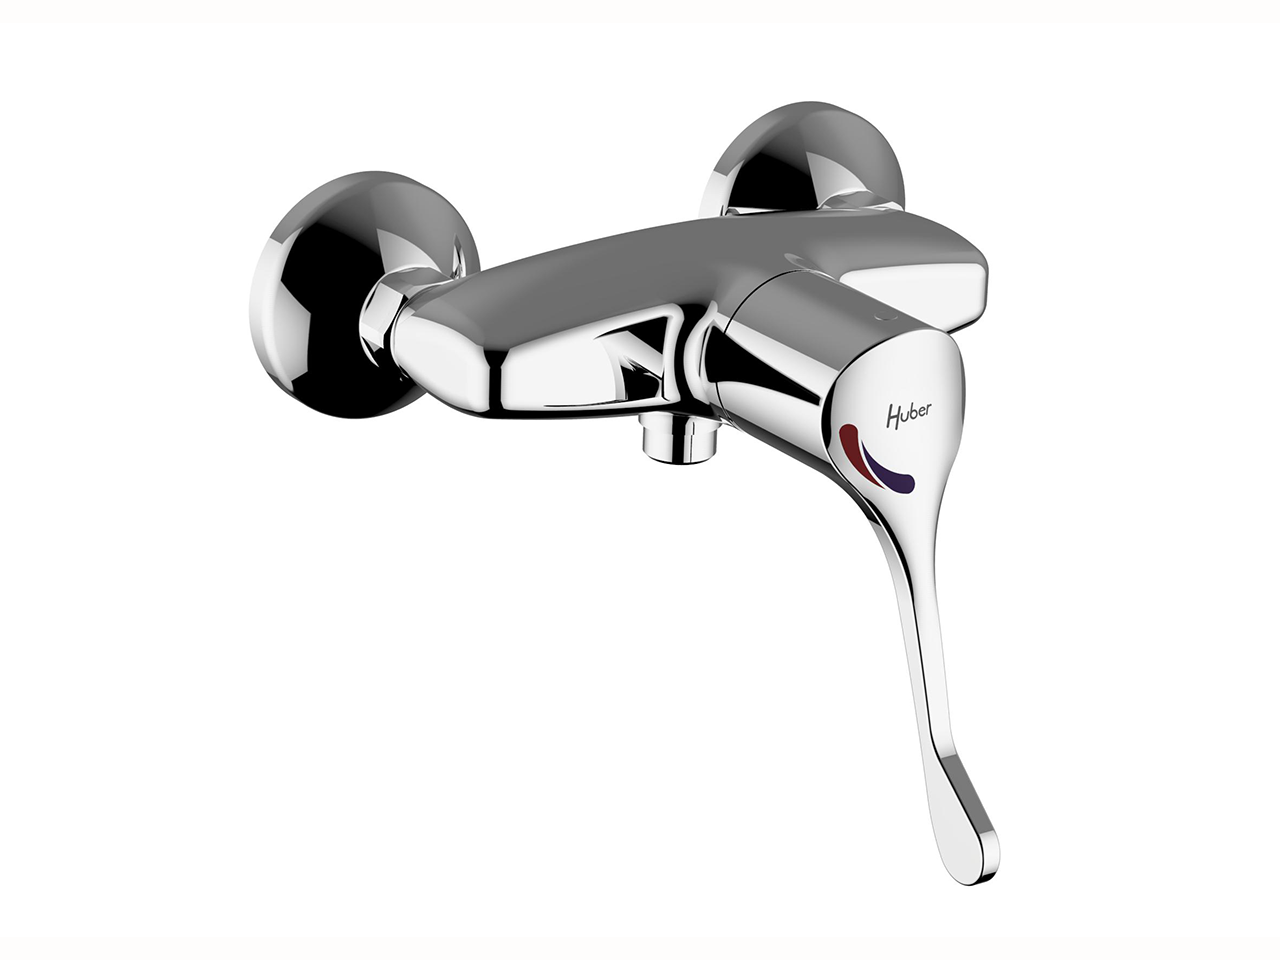 HUBERHTS Basic Thermo Sequential Shower Mixer COMMUNITY